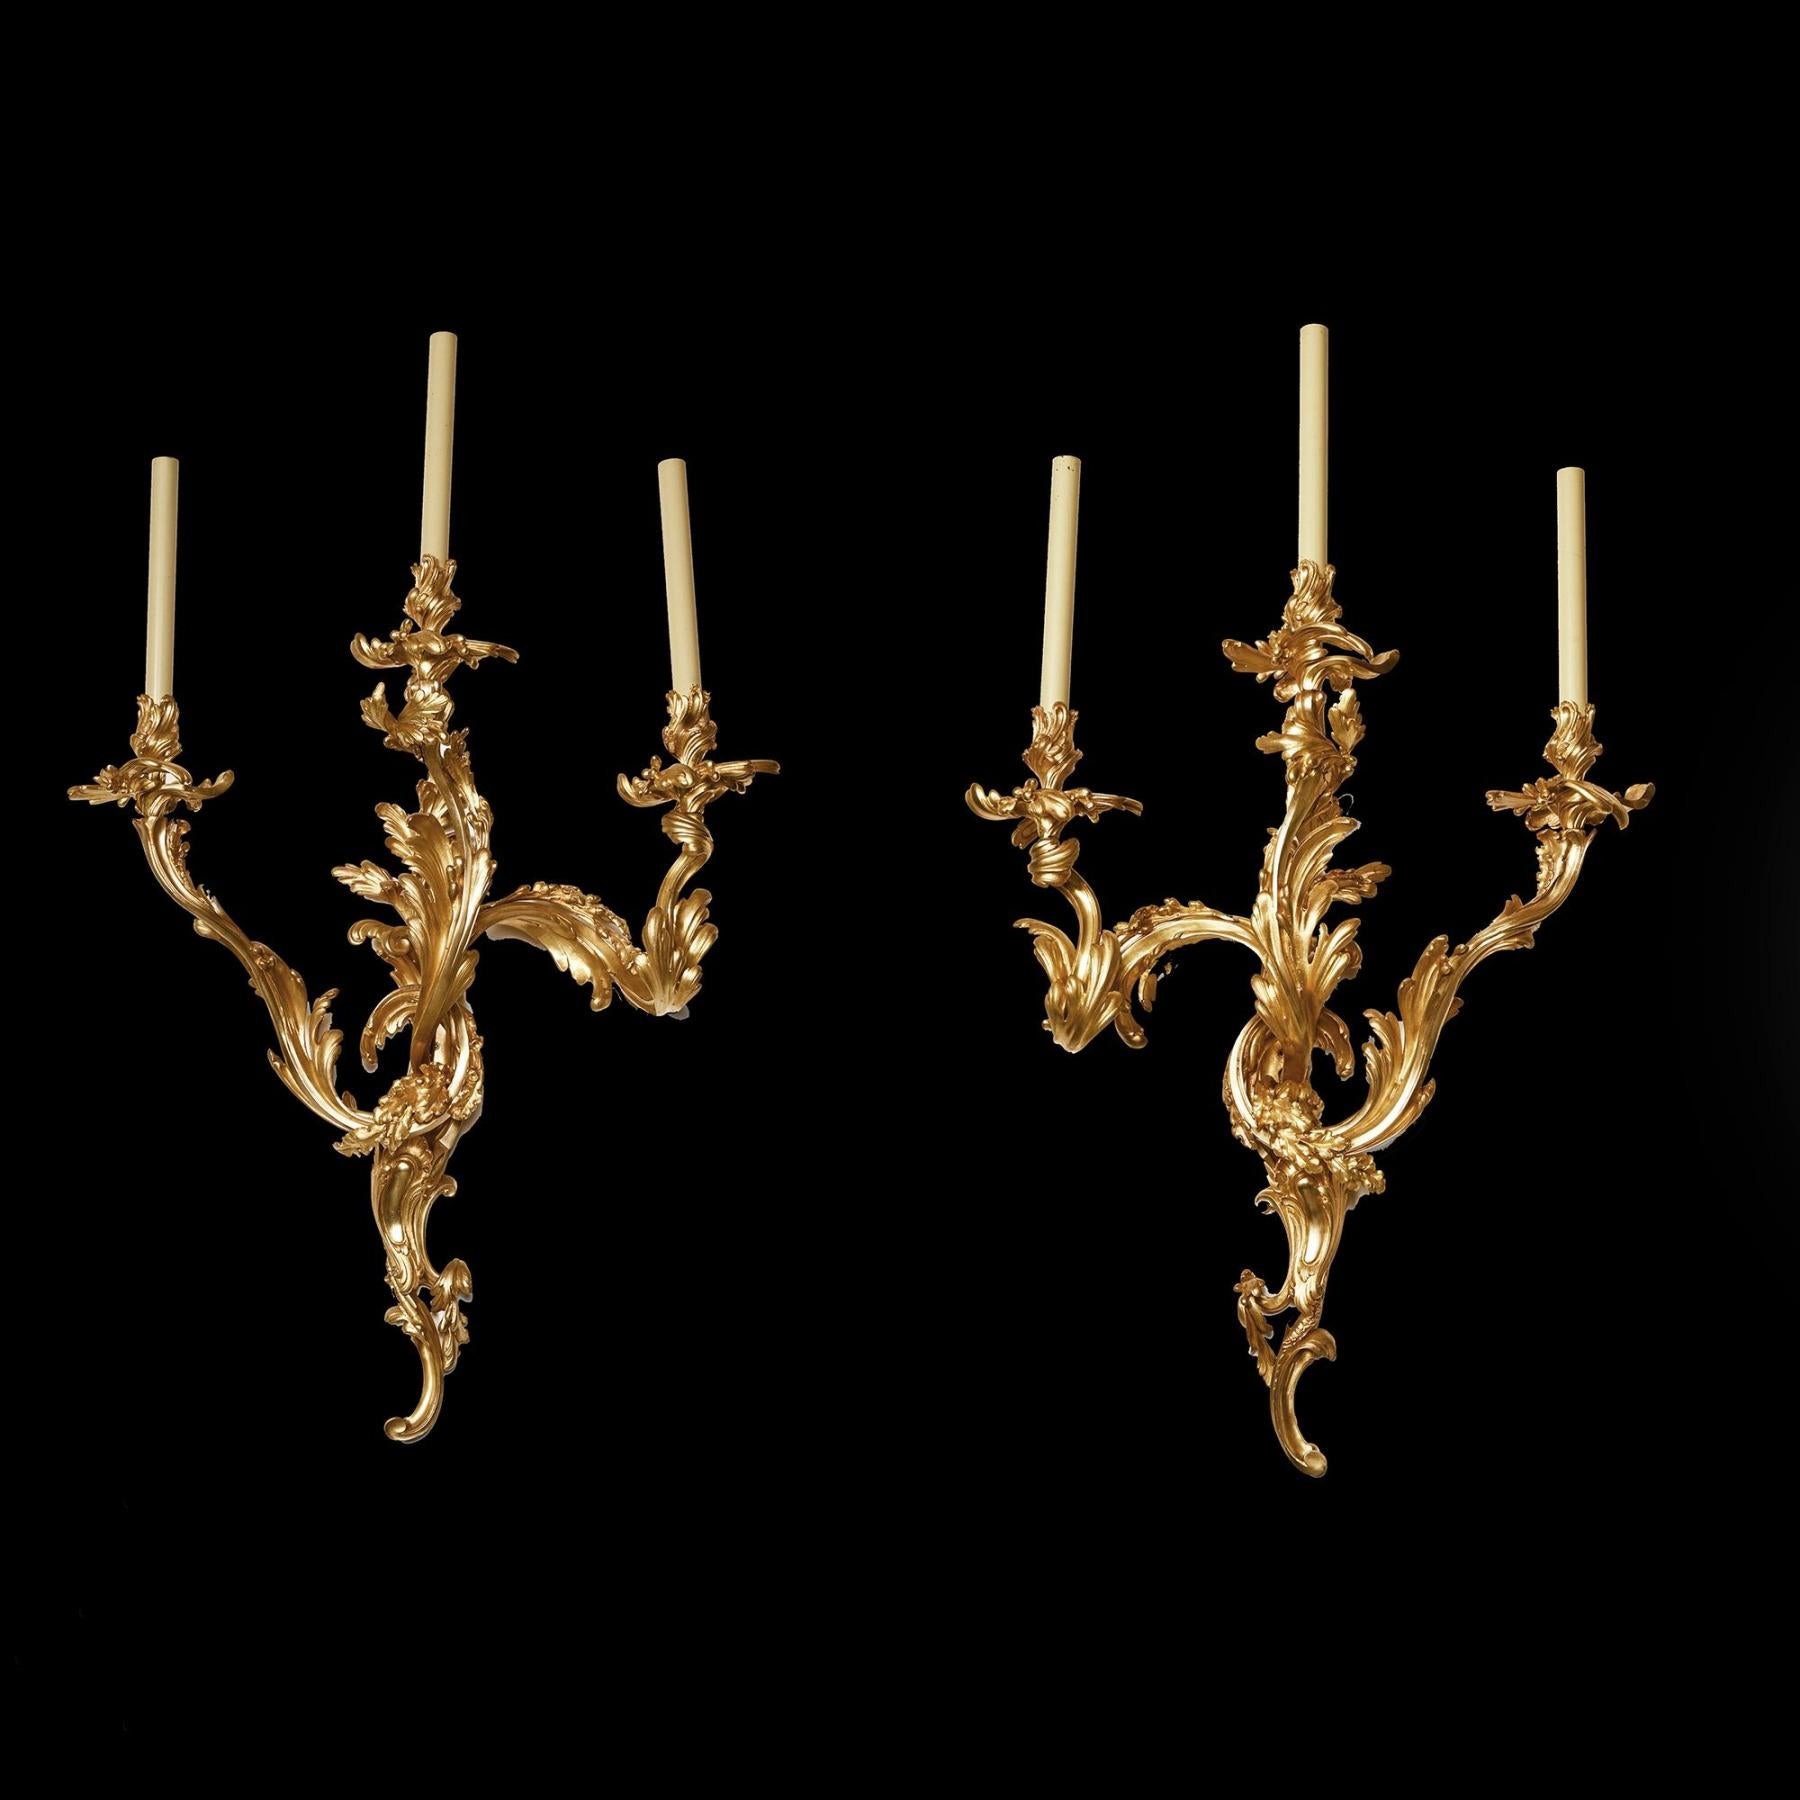 Pair of Large 19th Century French Three Branch Ormolu Wall Lights or Appliqués For Sale 3